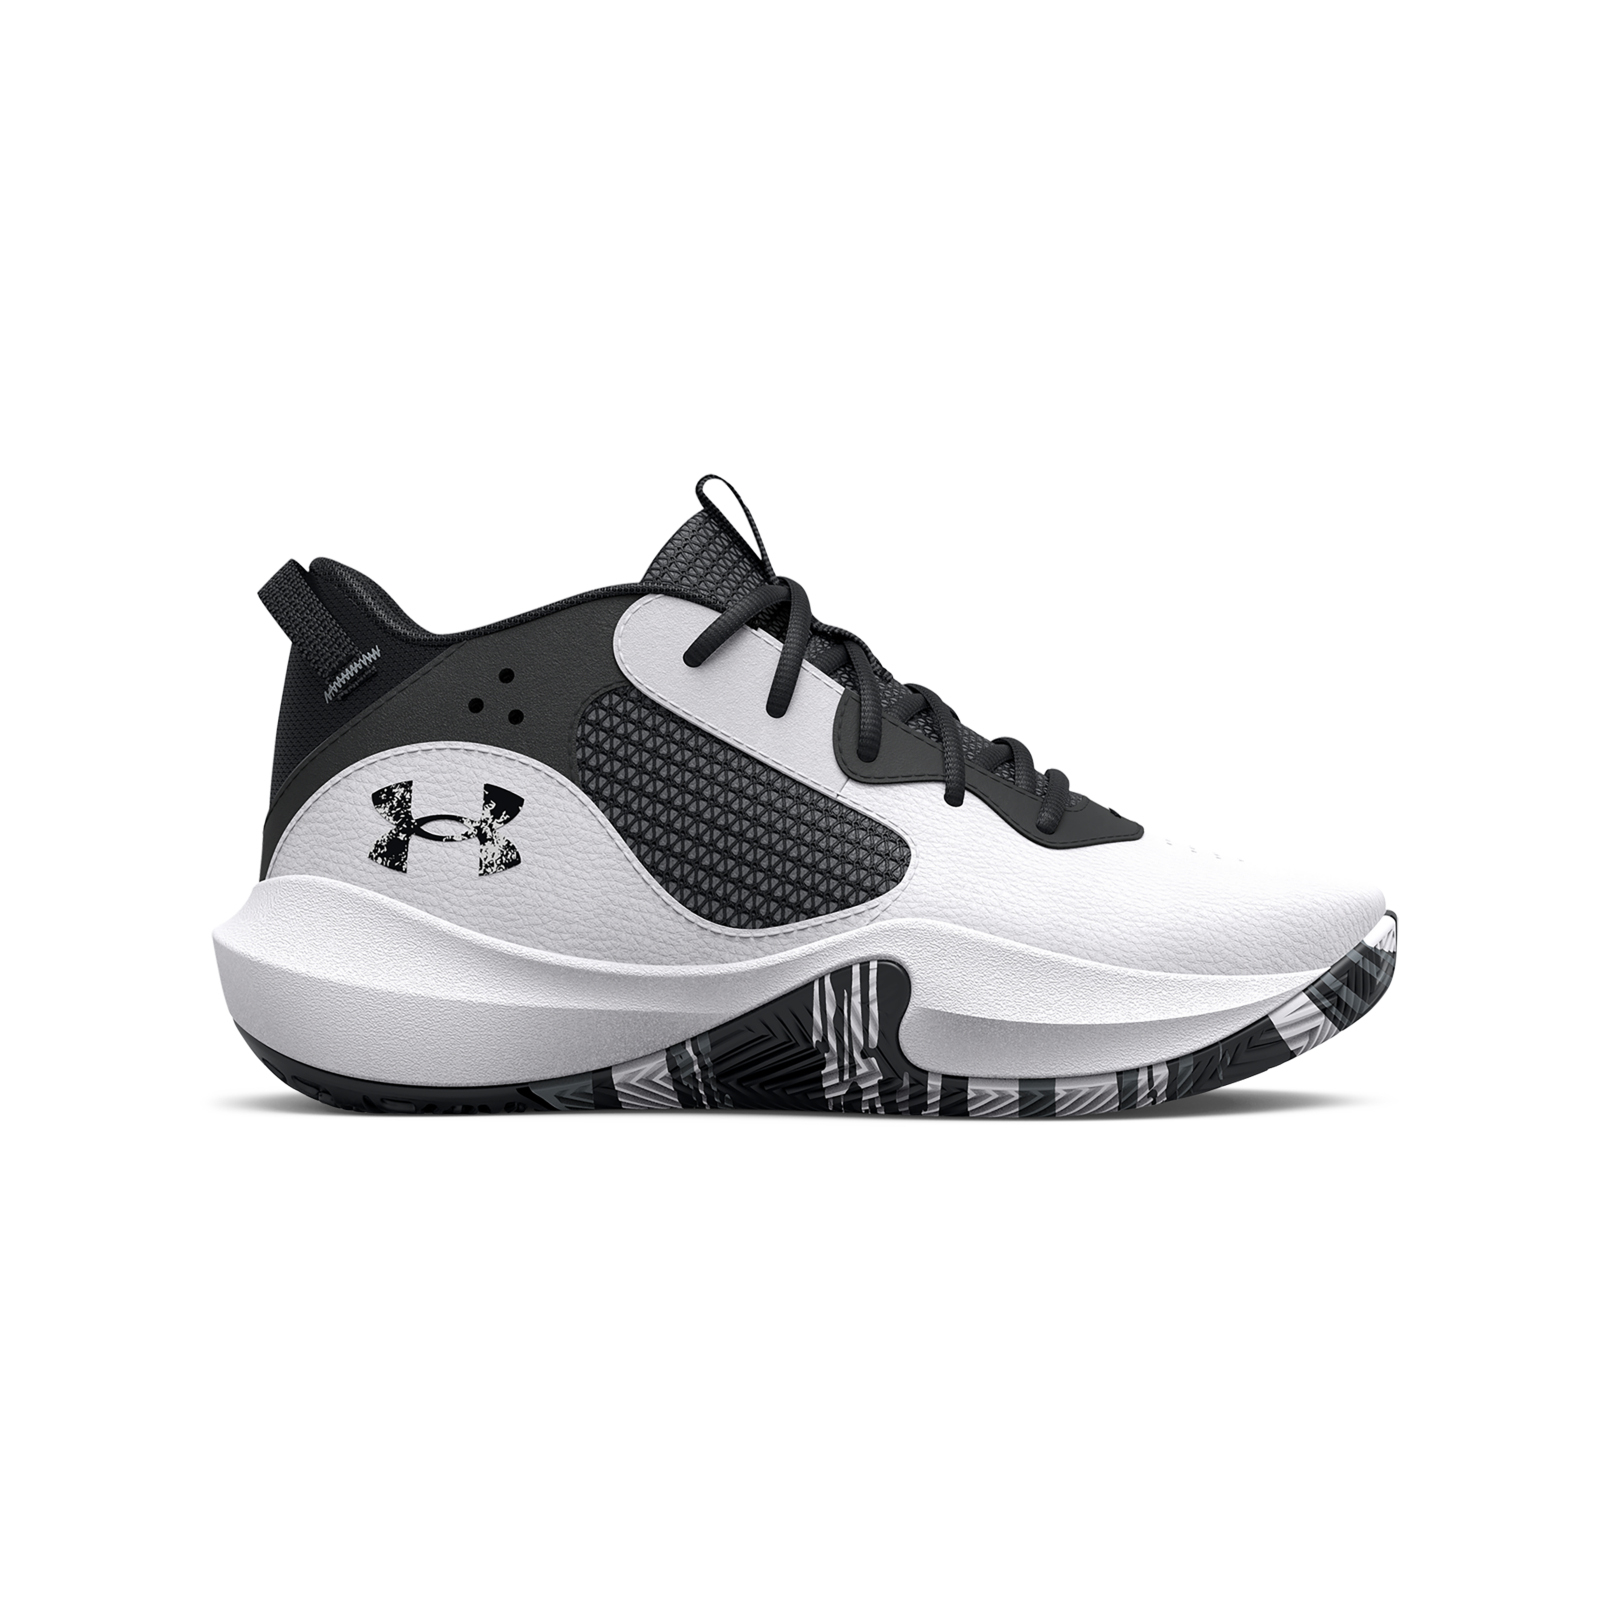 Under Armour - 3025618 UA PS LOCKDOWN 6 - 101/9171 Παιδικά > Παπούτσια > Αθλητικά > Παπούτσι Low Cut